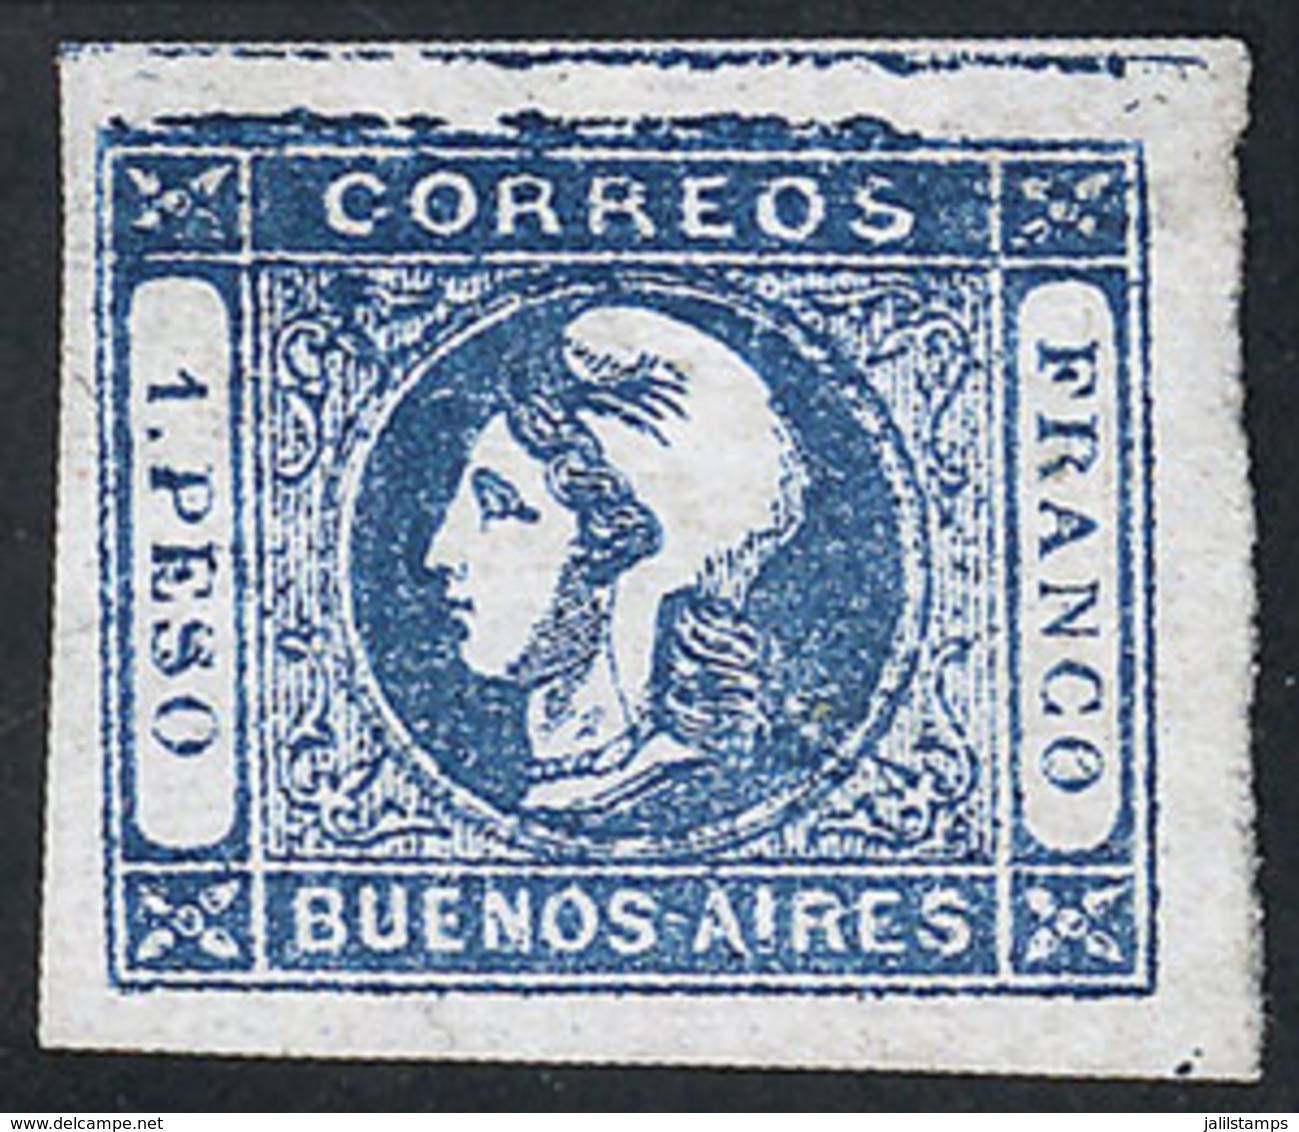 ARGENTINA: GJ.17, 1P. Blue, Splendid Mint Example WITH TOP SHEET MARGIN, Very Fresh And Attractive, Excellent Quality! - Buenos Aires (1858-1864)